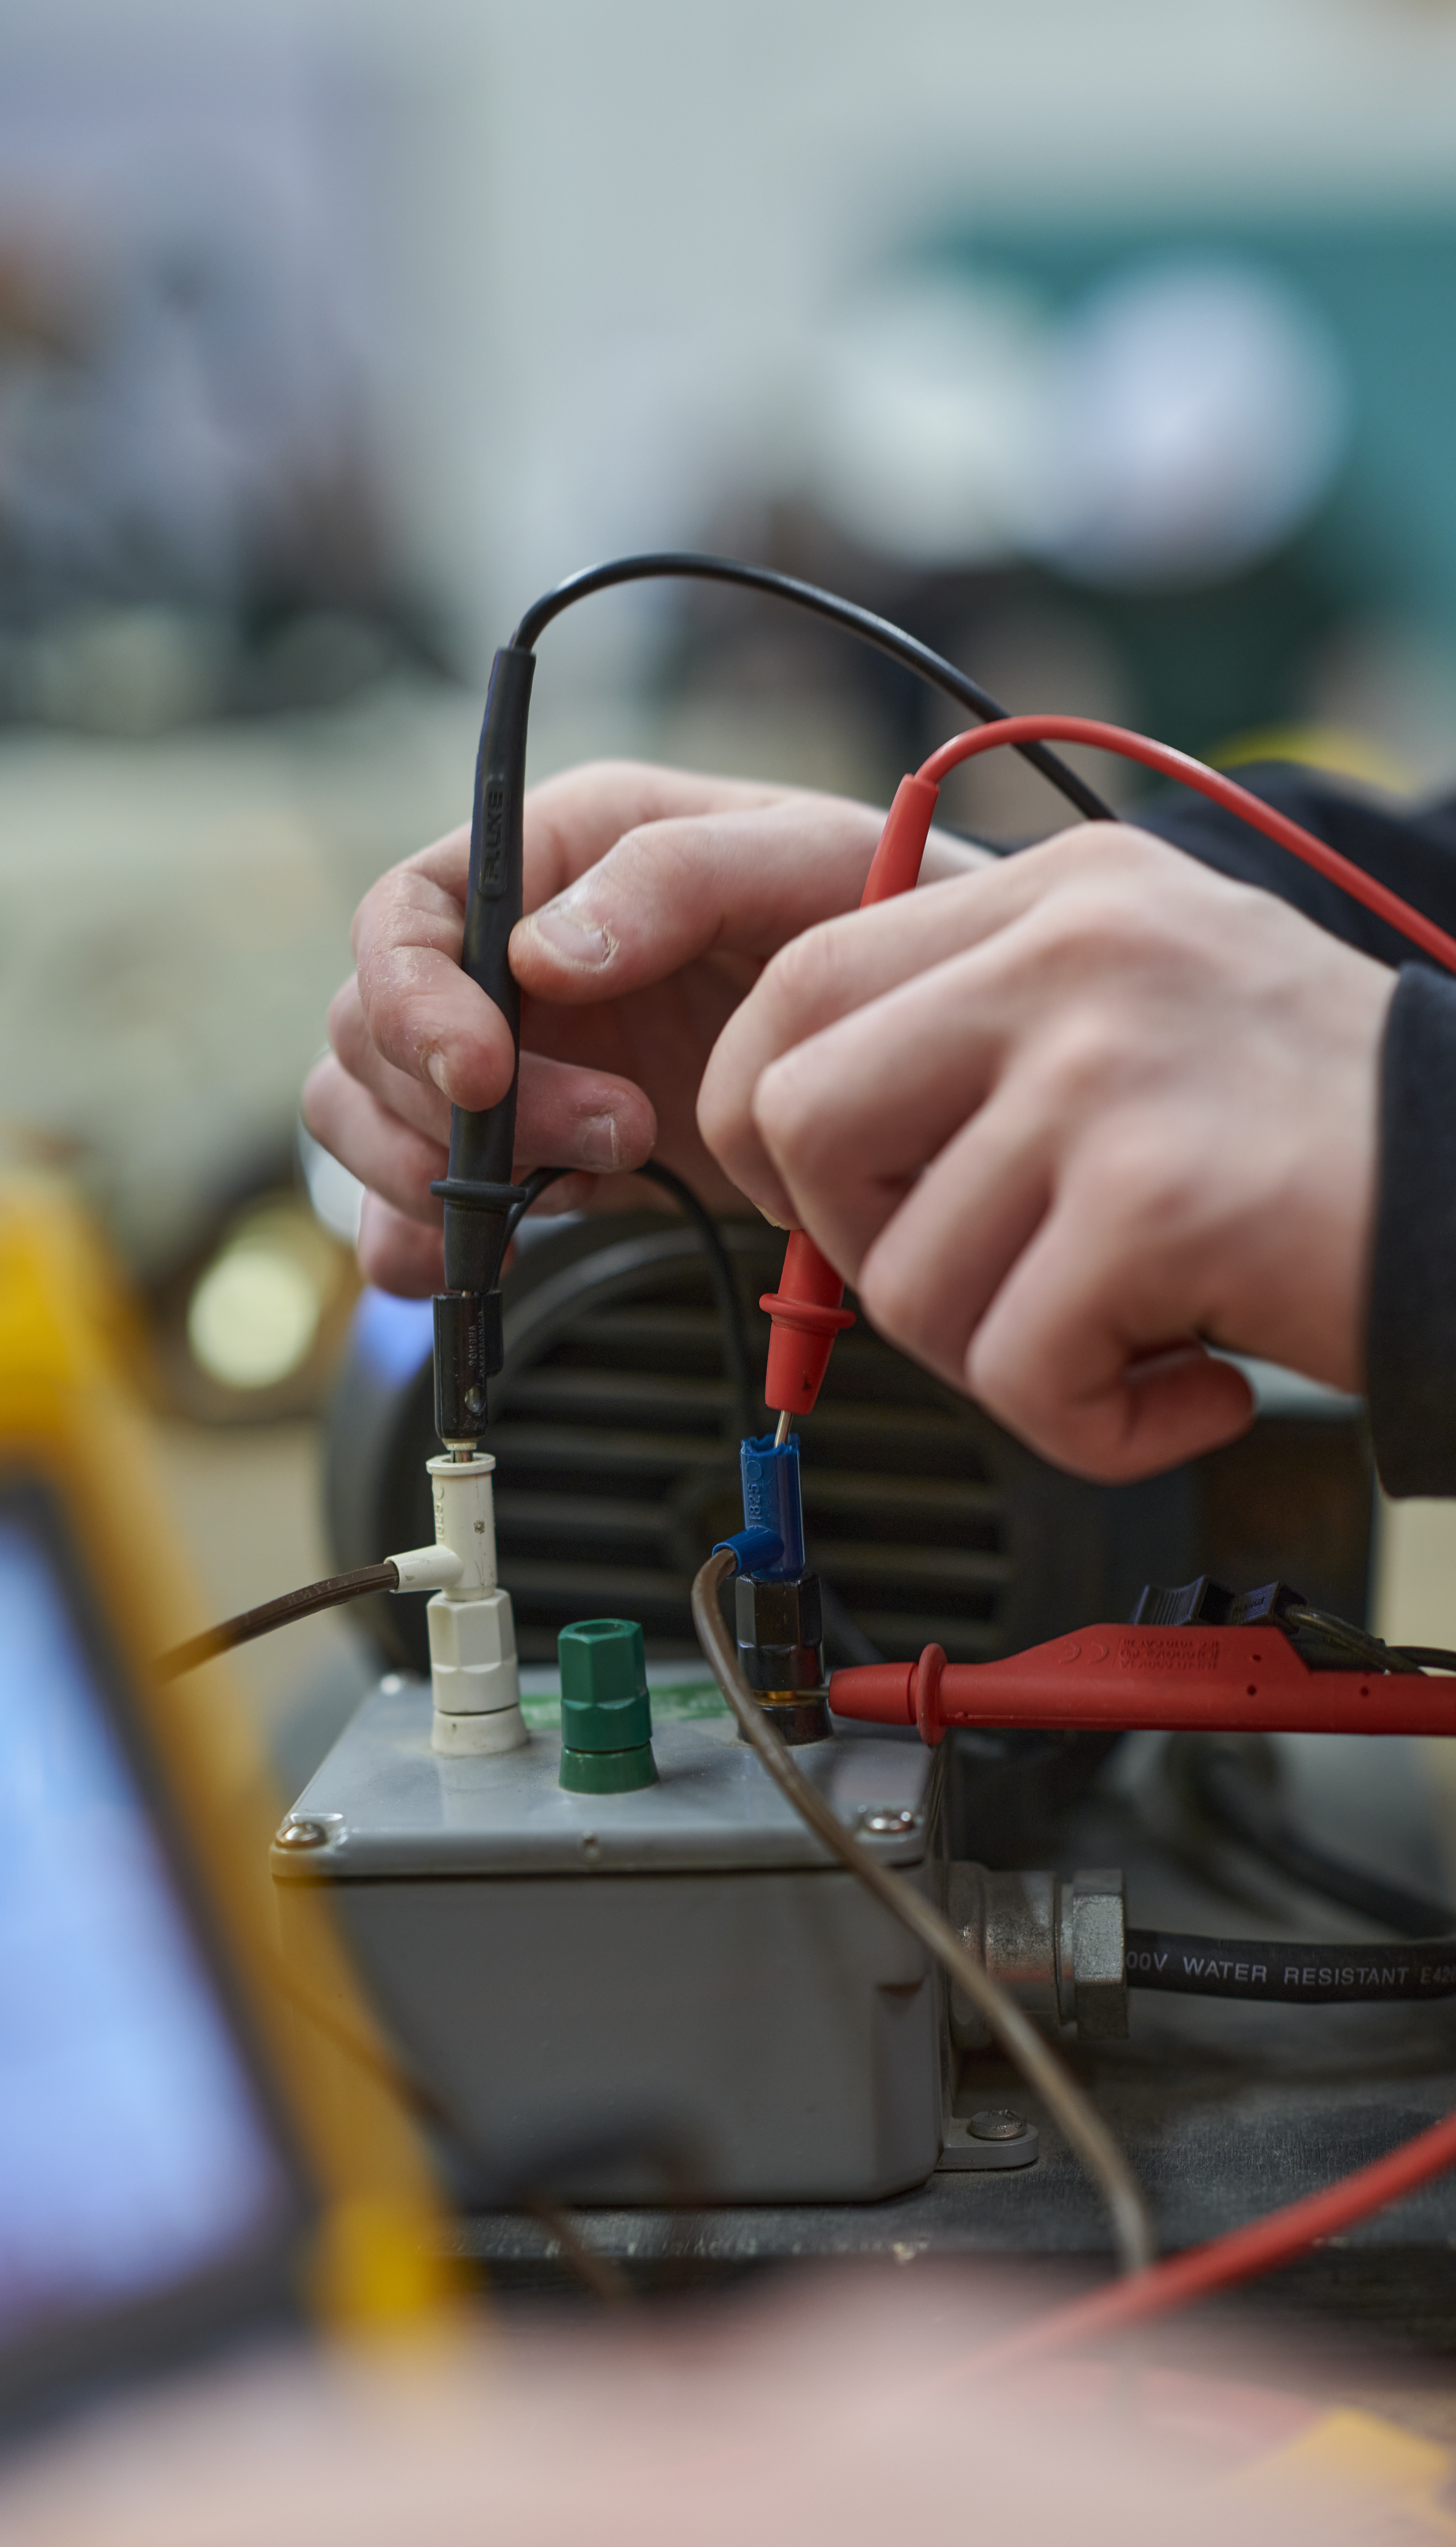 Electrical Technician Student Working with a power meter